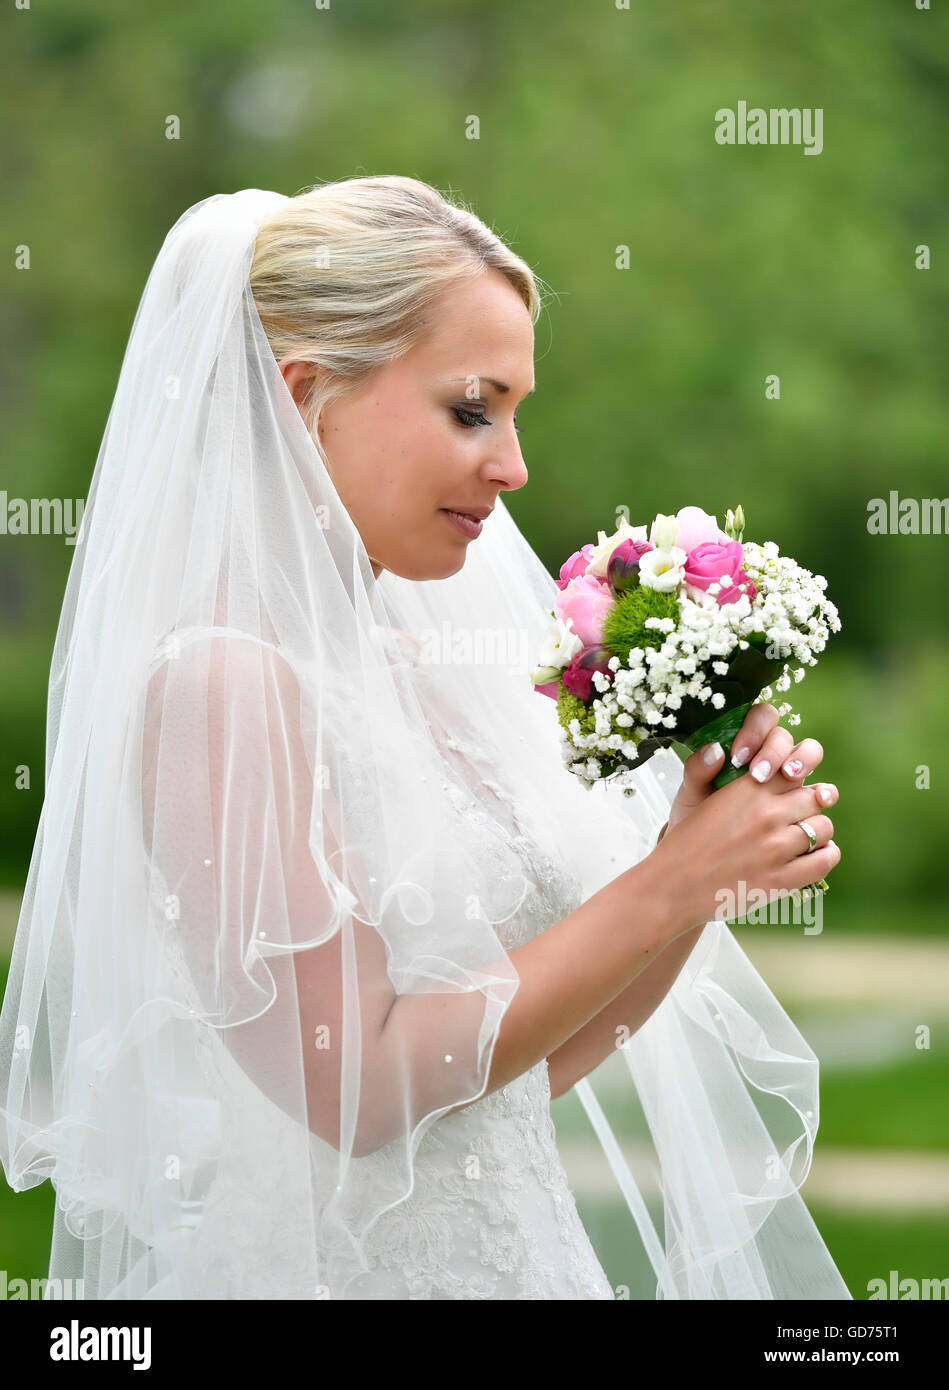 Bride in wedding dress with veil looking at bridal bouqet, Germany Stock Photo